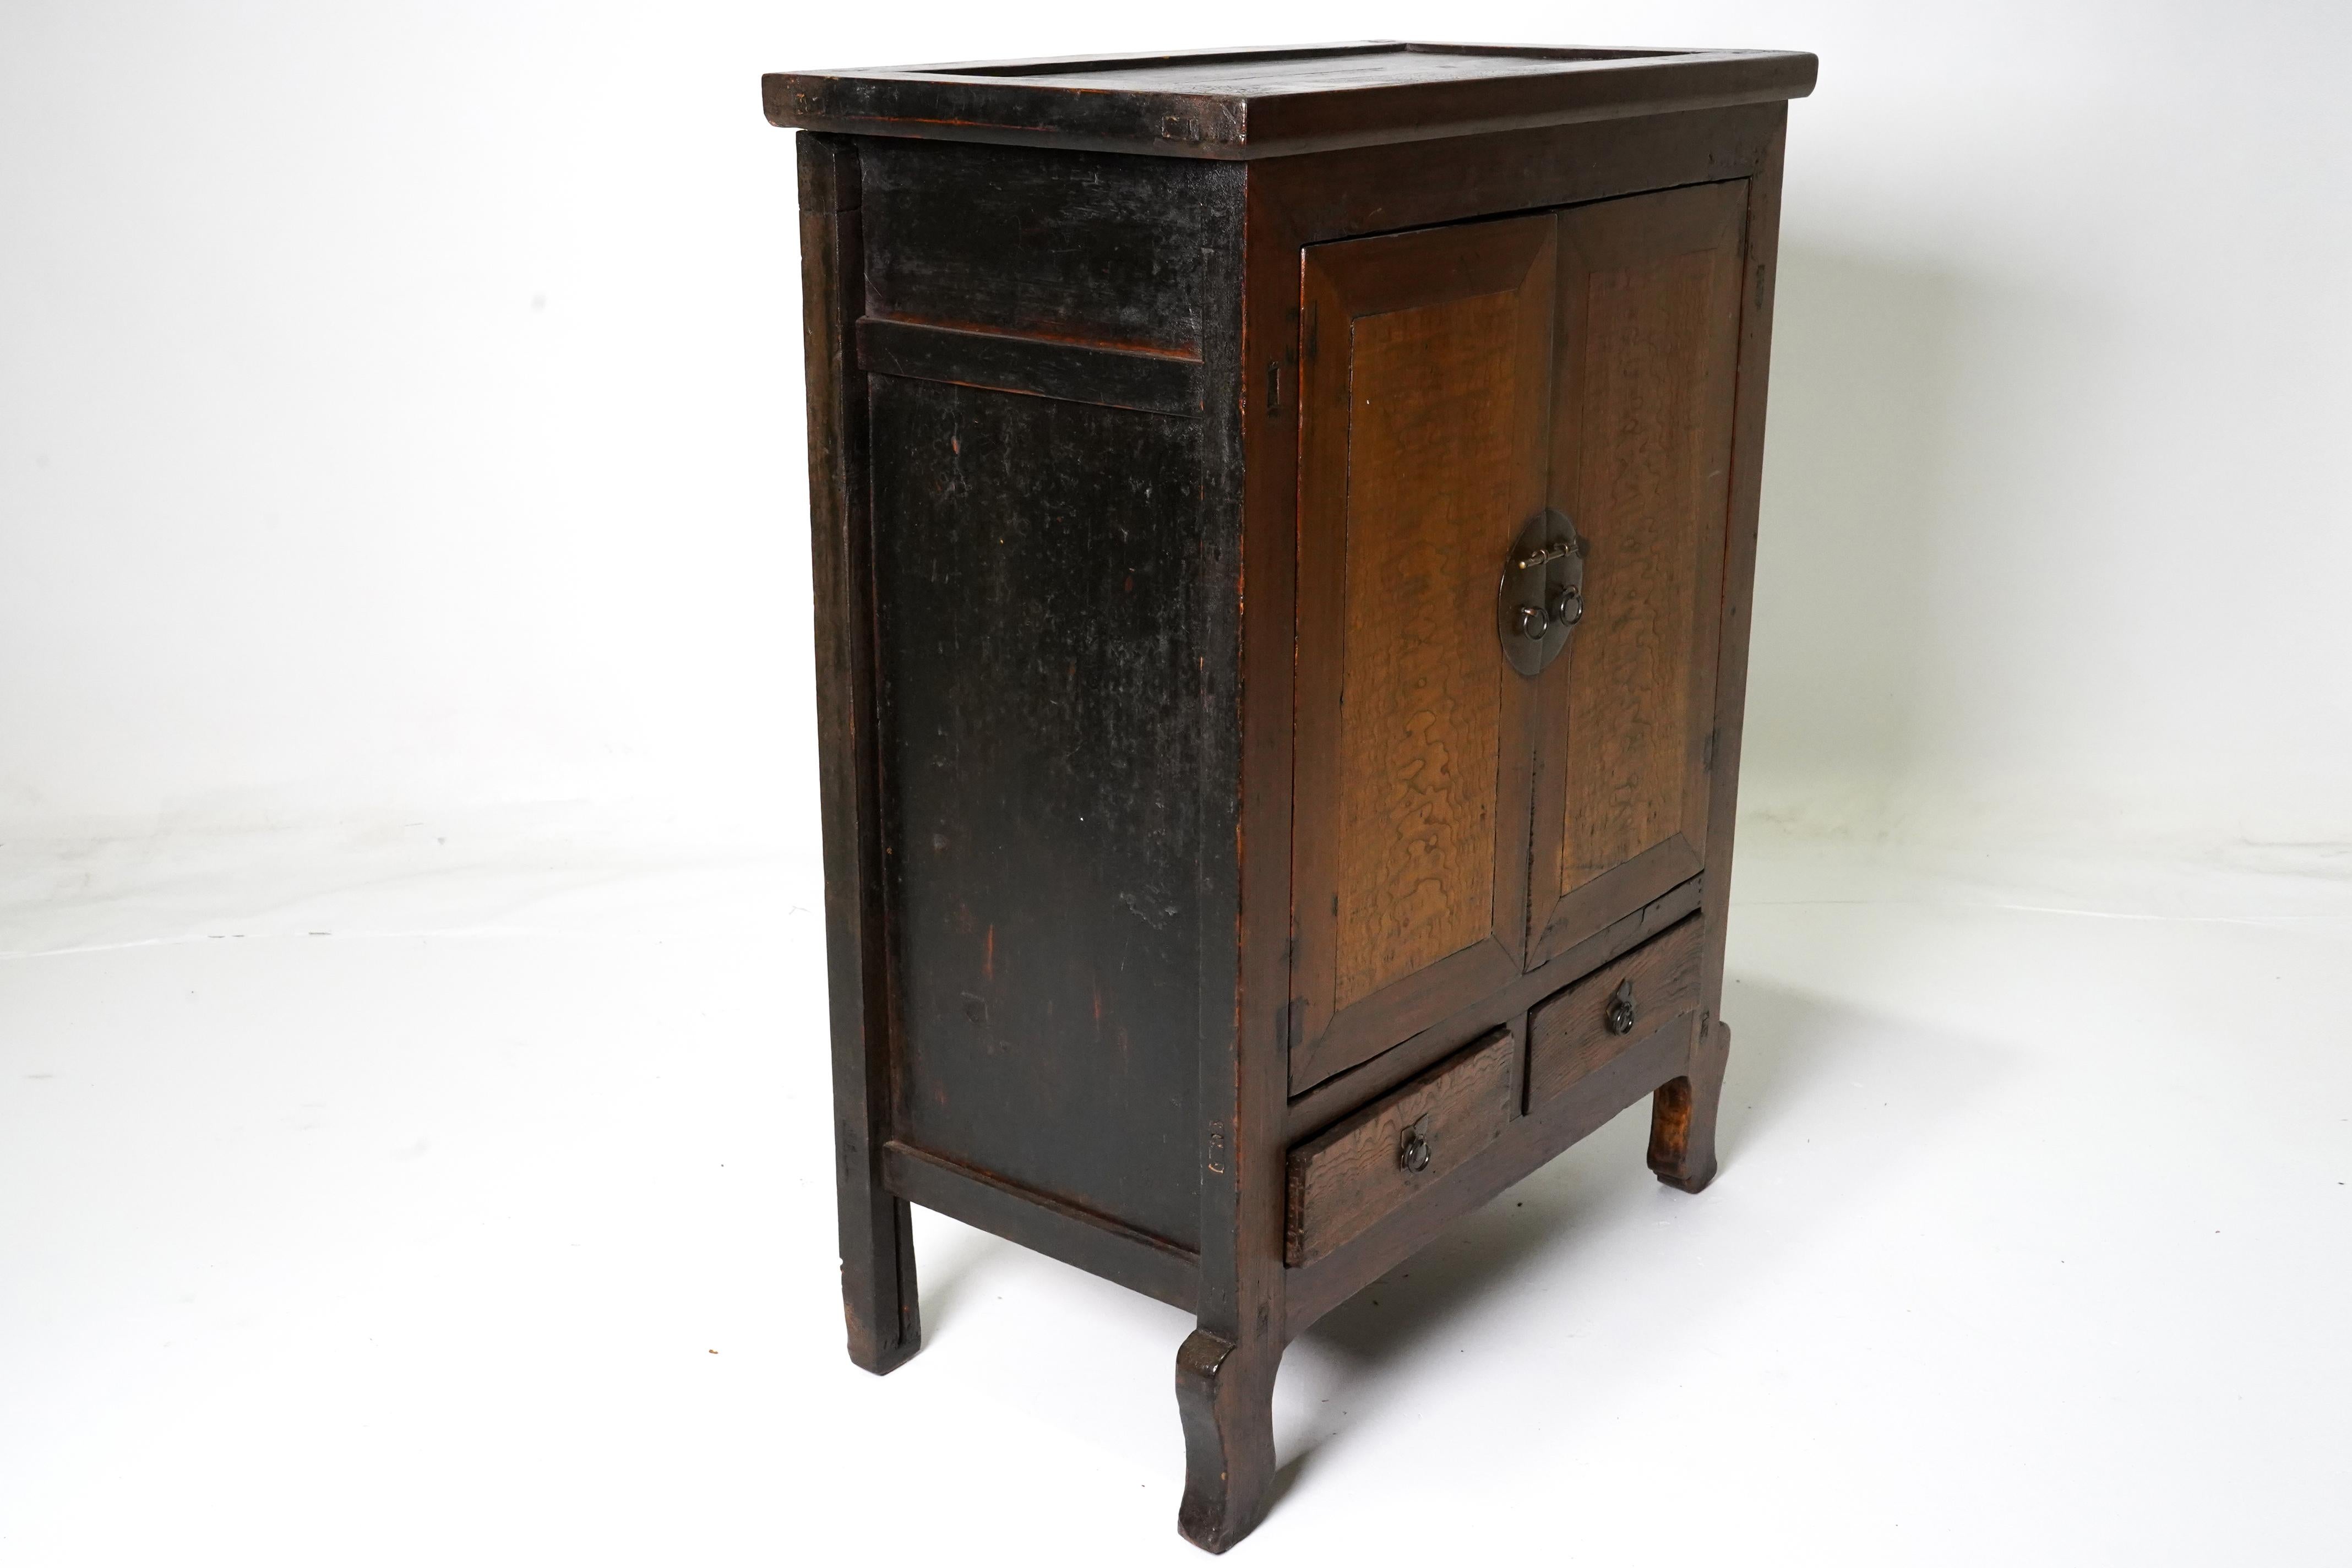 20th Century Chinese Low Cabinet with Burled Doors